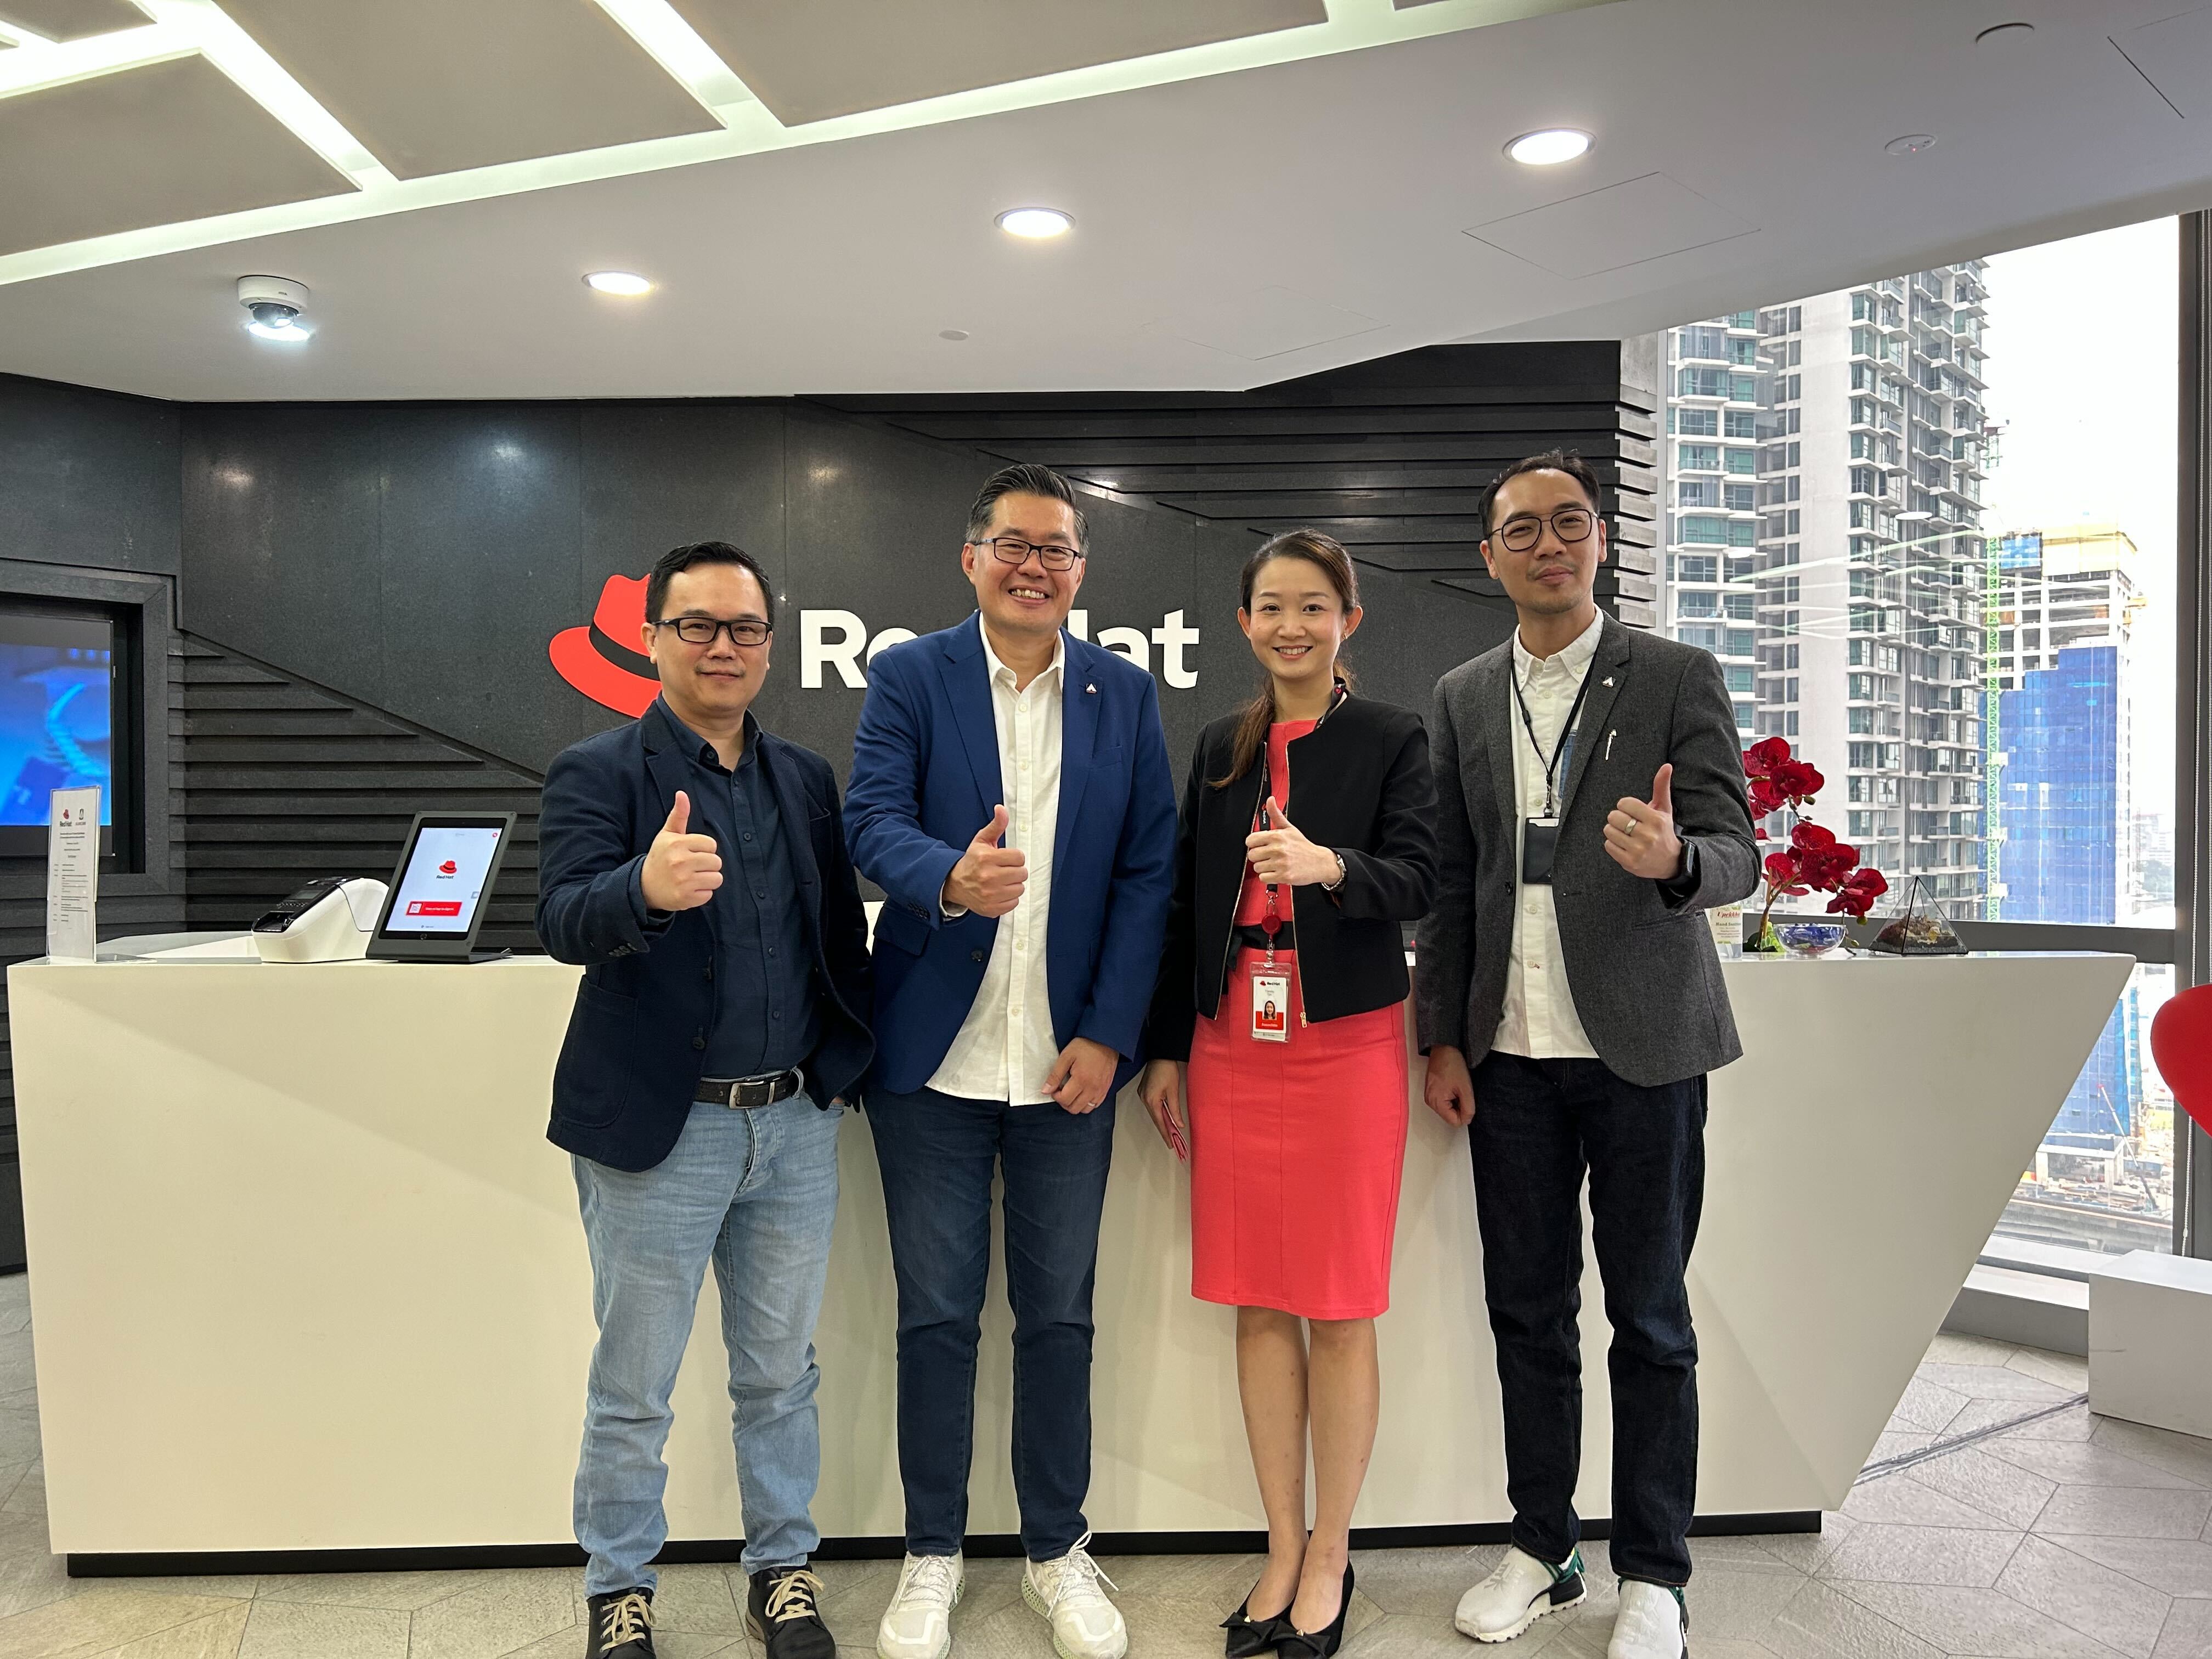 (Left to right) Alliance Bank's leaders Ken Yong (Head, Group Digital Transformation Office) and Edwin Lee (Head, Cards and Loans), Tammy Tan from Red Hat, and David Lim (VP & Head, Credit Card & Personal Loan Products) from Alliance Bank celebrating their successful collaboration on the Visa Virtual Credit Card project.